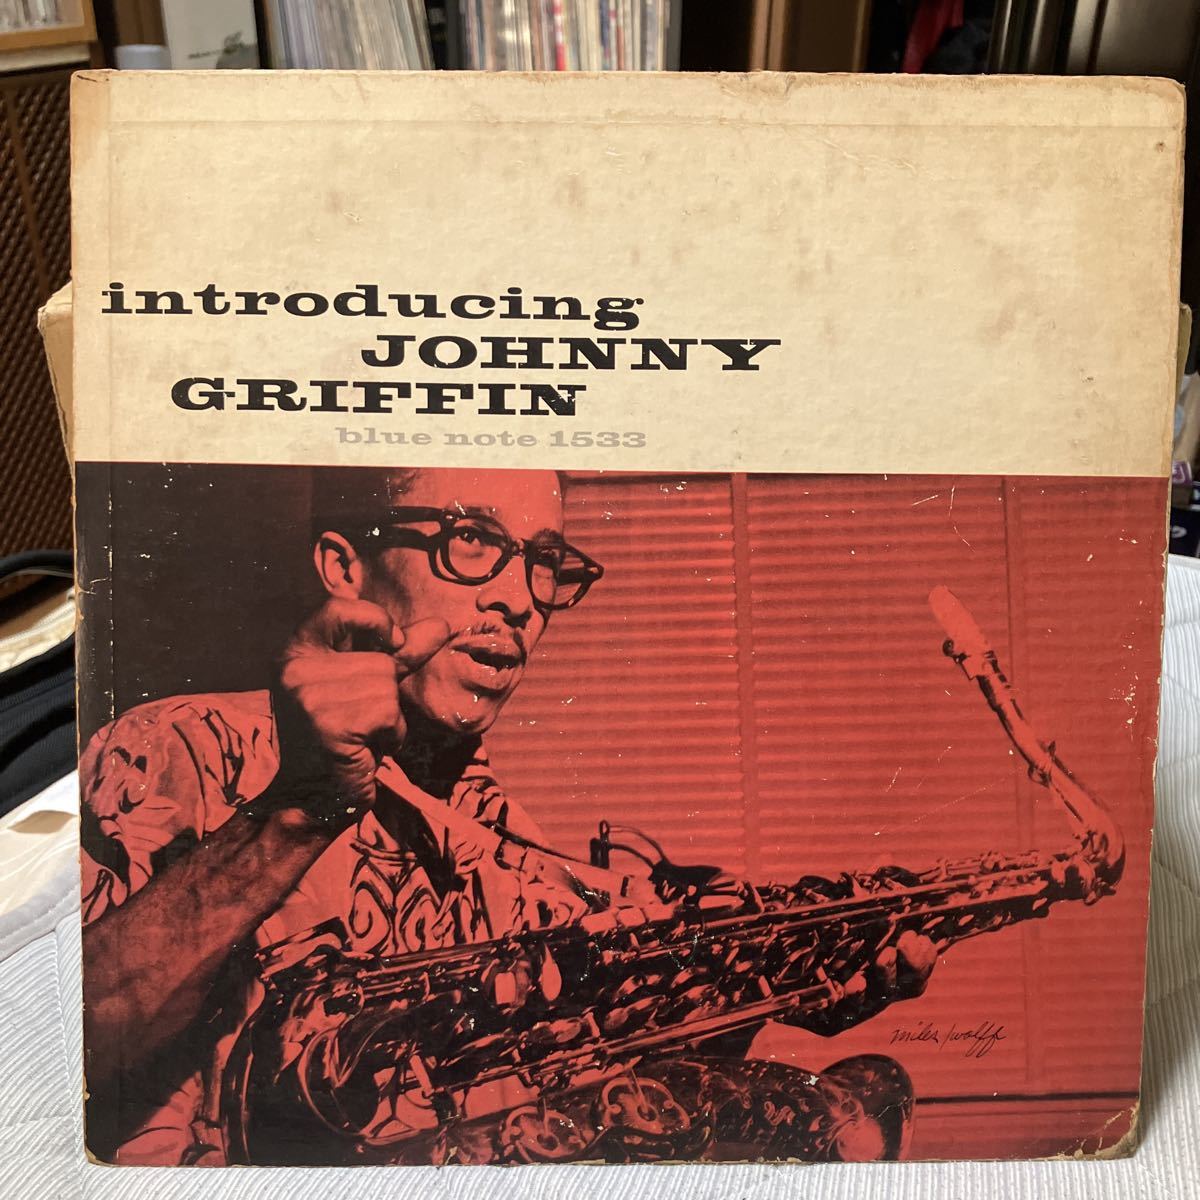 【LP】★オリジ★ジョニー・グリフィン / JOHNNY GRIFFIN / イントロデューシング / INTRODUCING / US盤 / BLUE NOTE 1533 LEXINGTON RVG